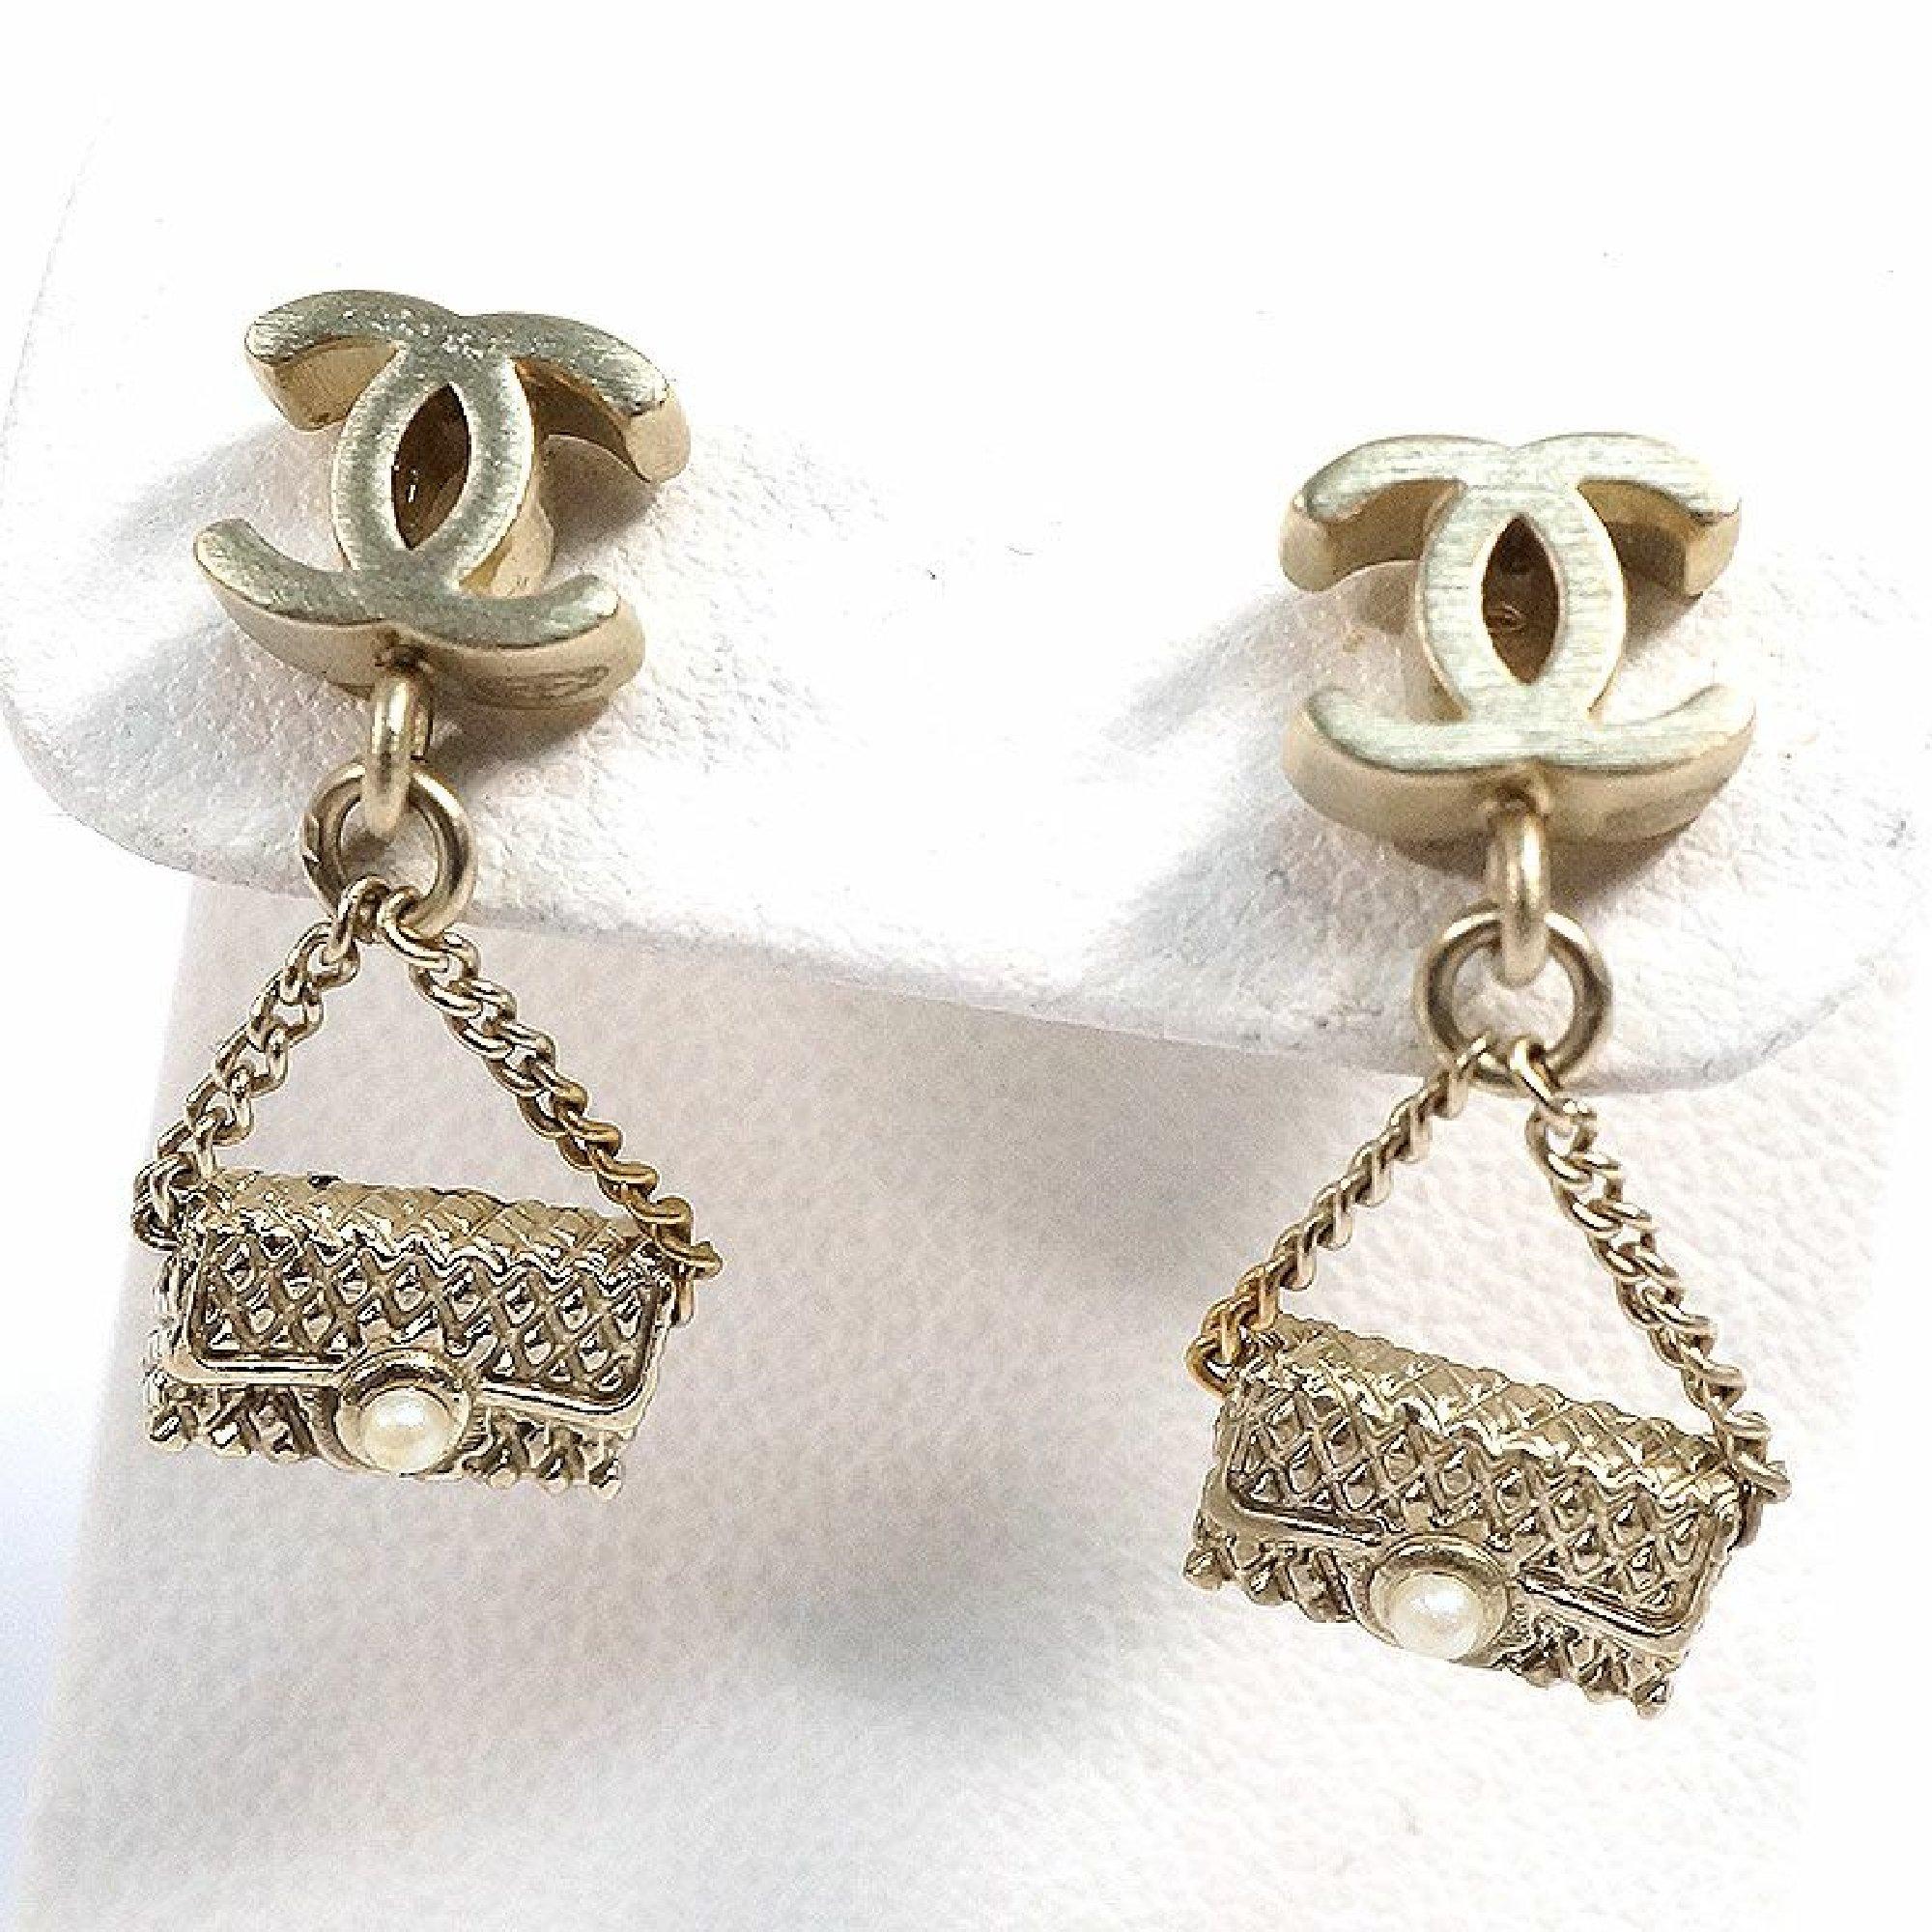 An authentic CHANEL COCO mark matelasse motif GP Womens Earrings champagne-gold. The color is Gold. The outside material is GP. This item is Contemporary. The year of manufacture would be 1986.
Rank
AB signs of wear (Small)
Used products in good